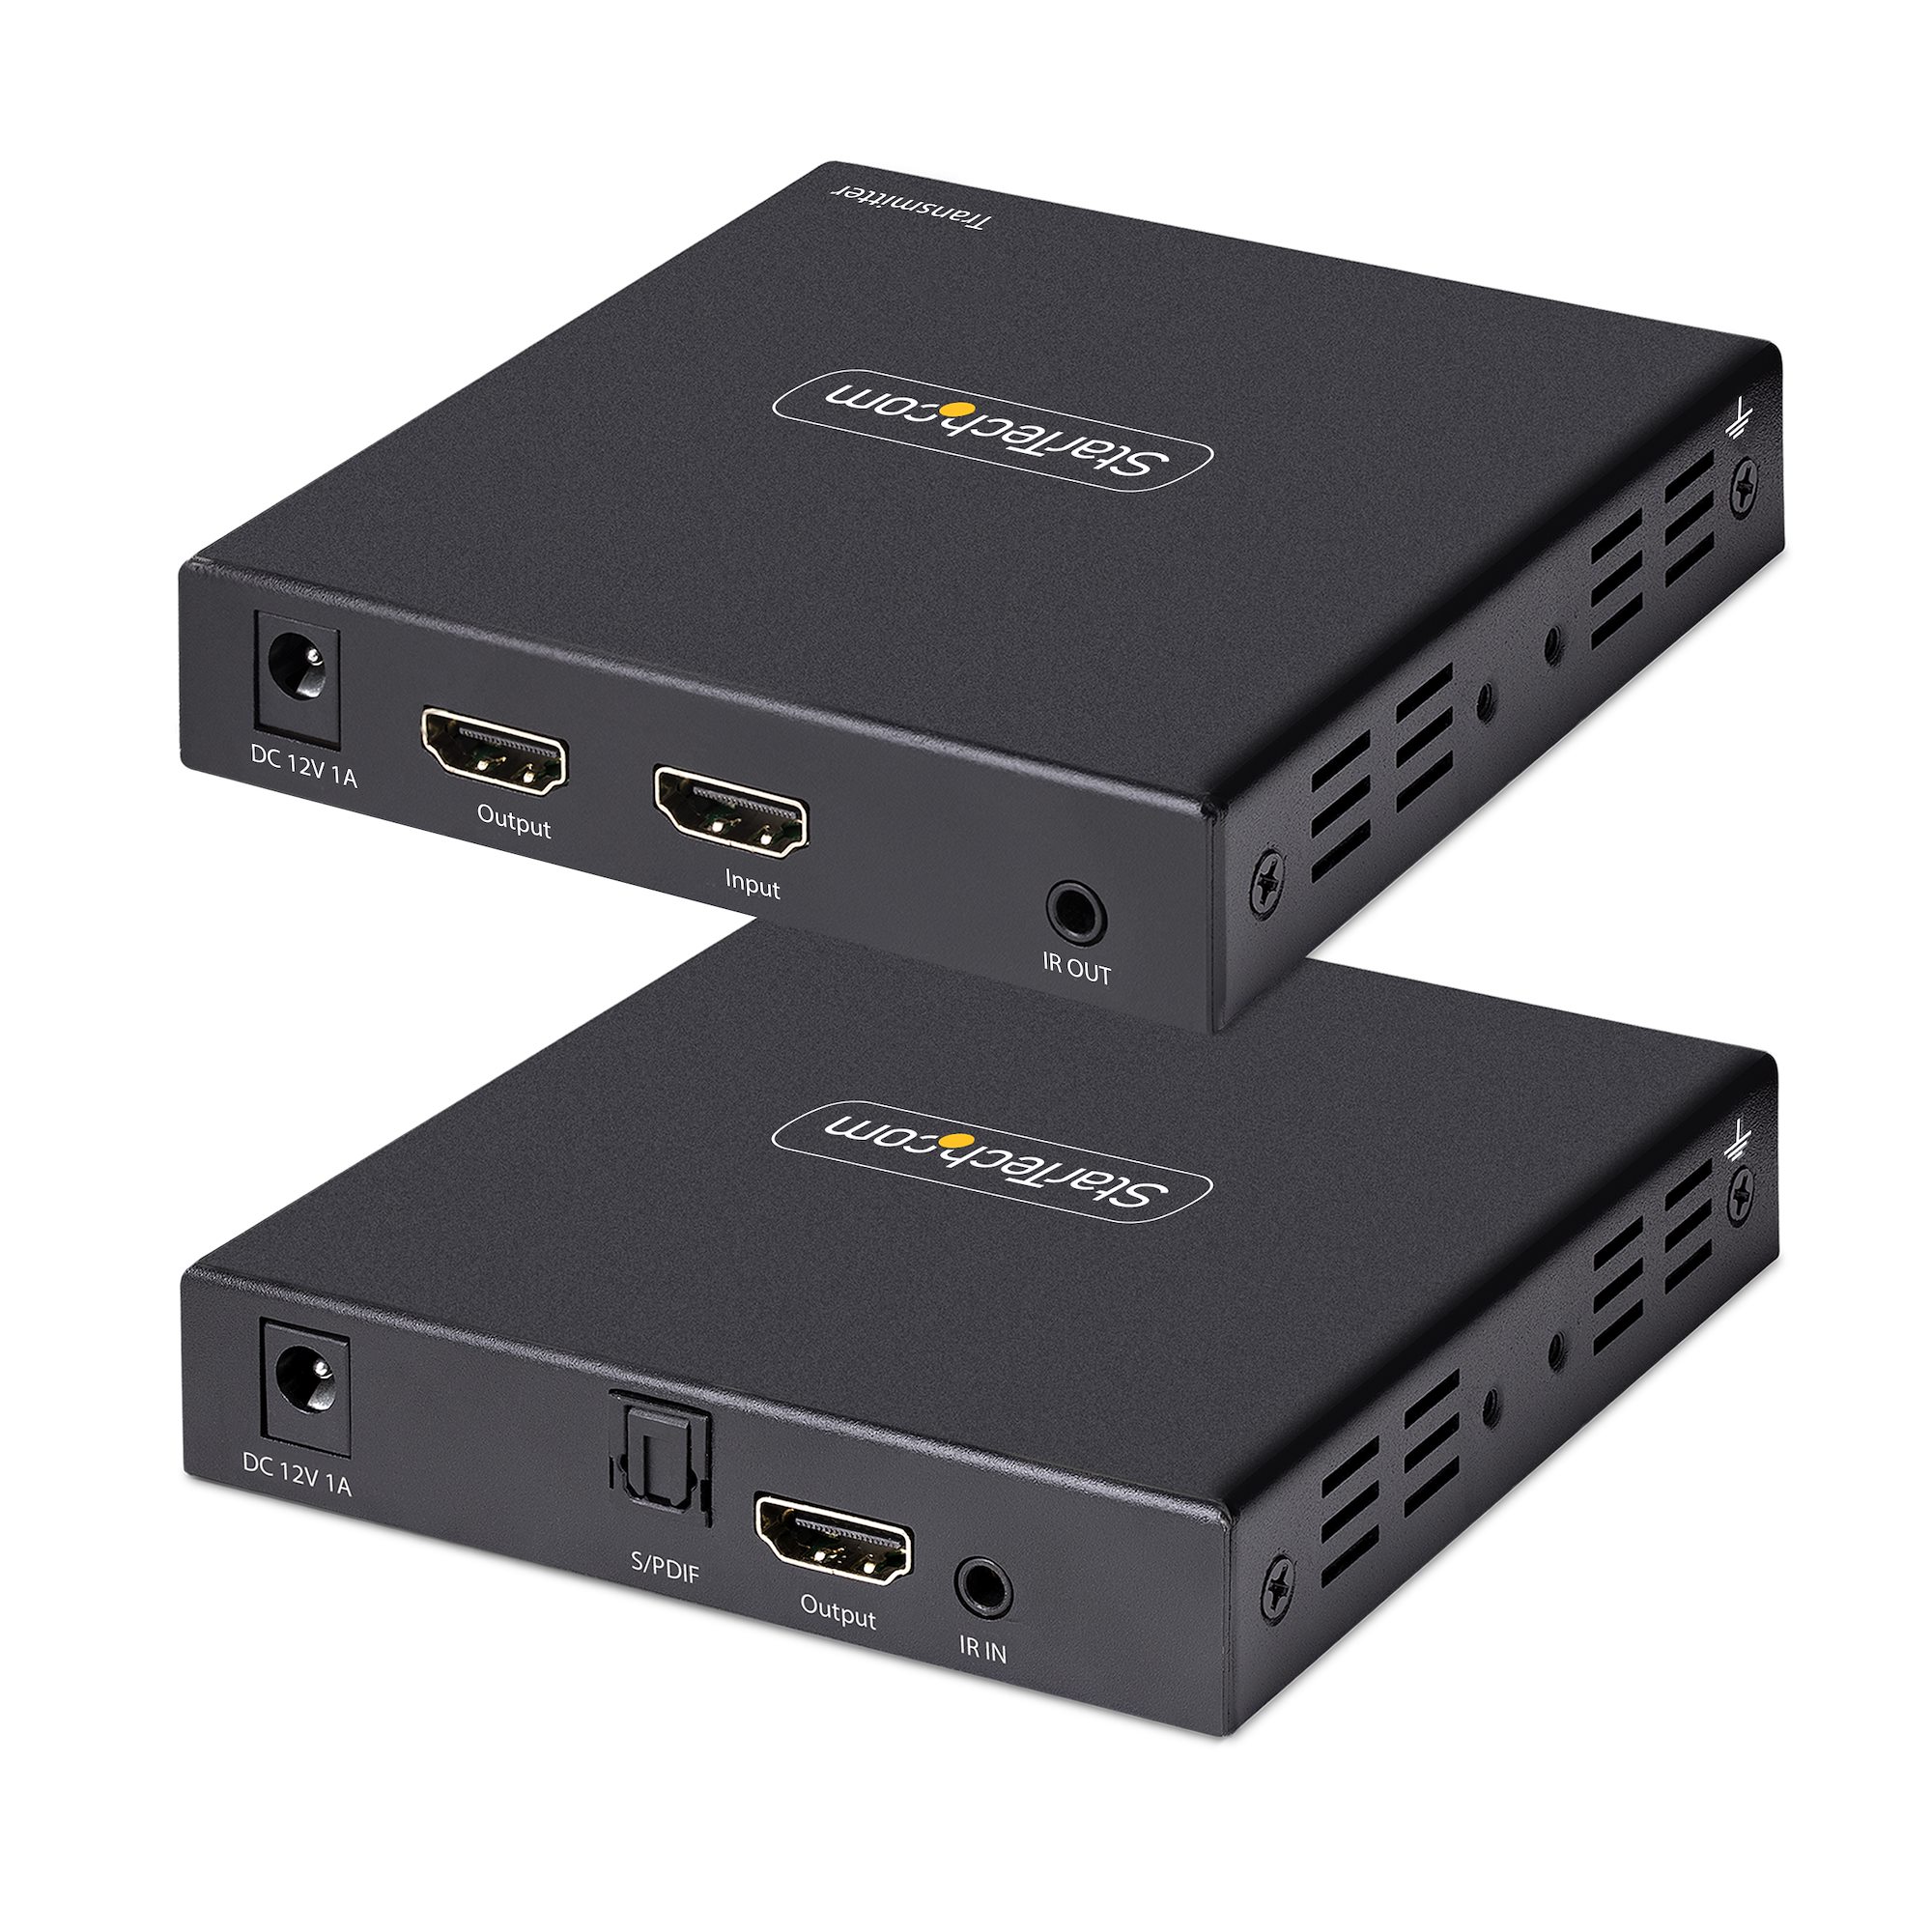 What is an HDMI Extender?